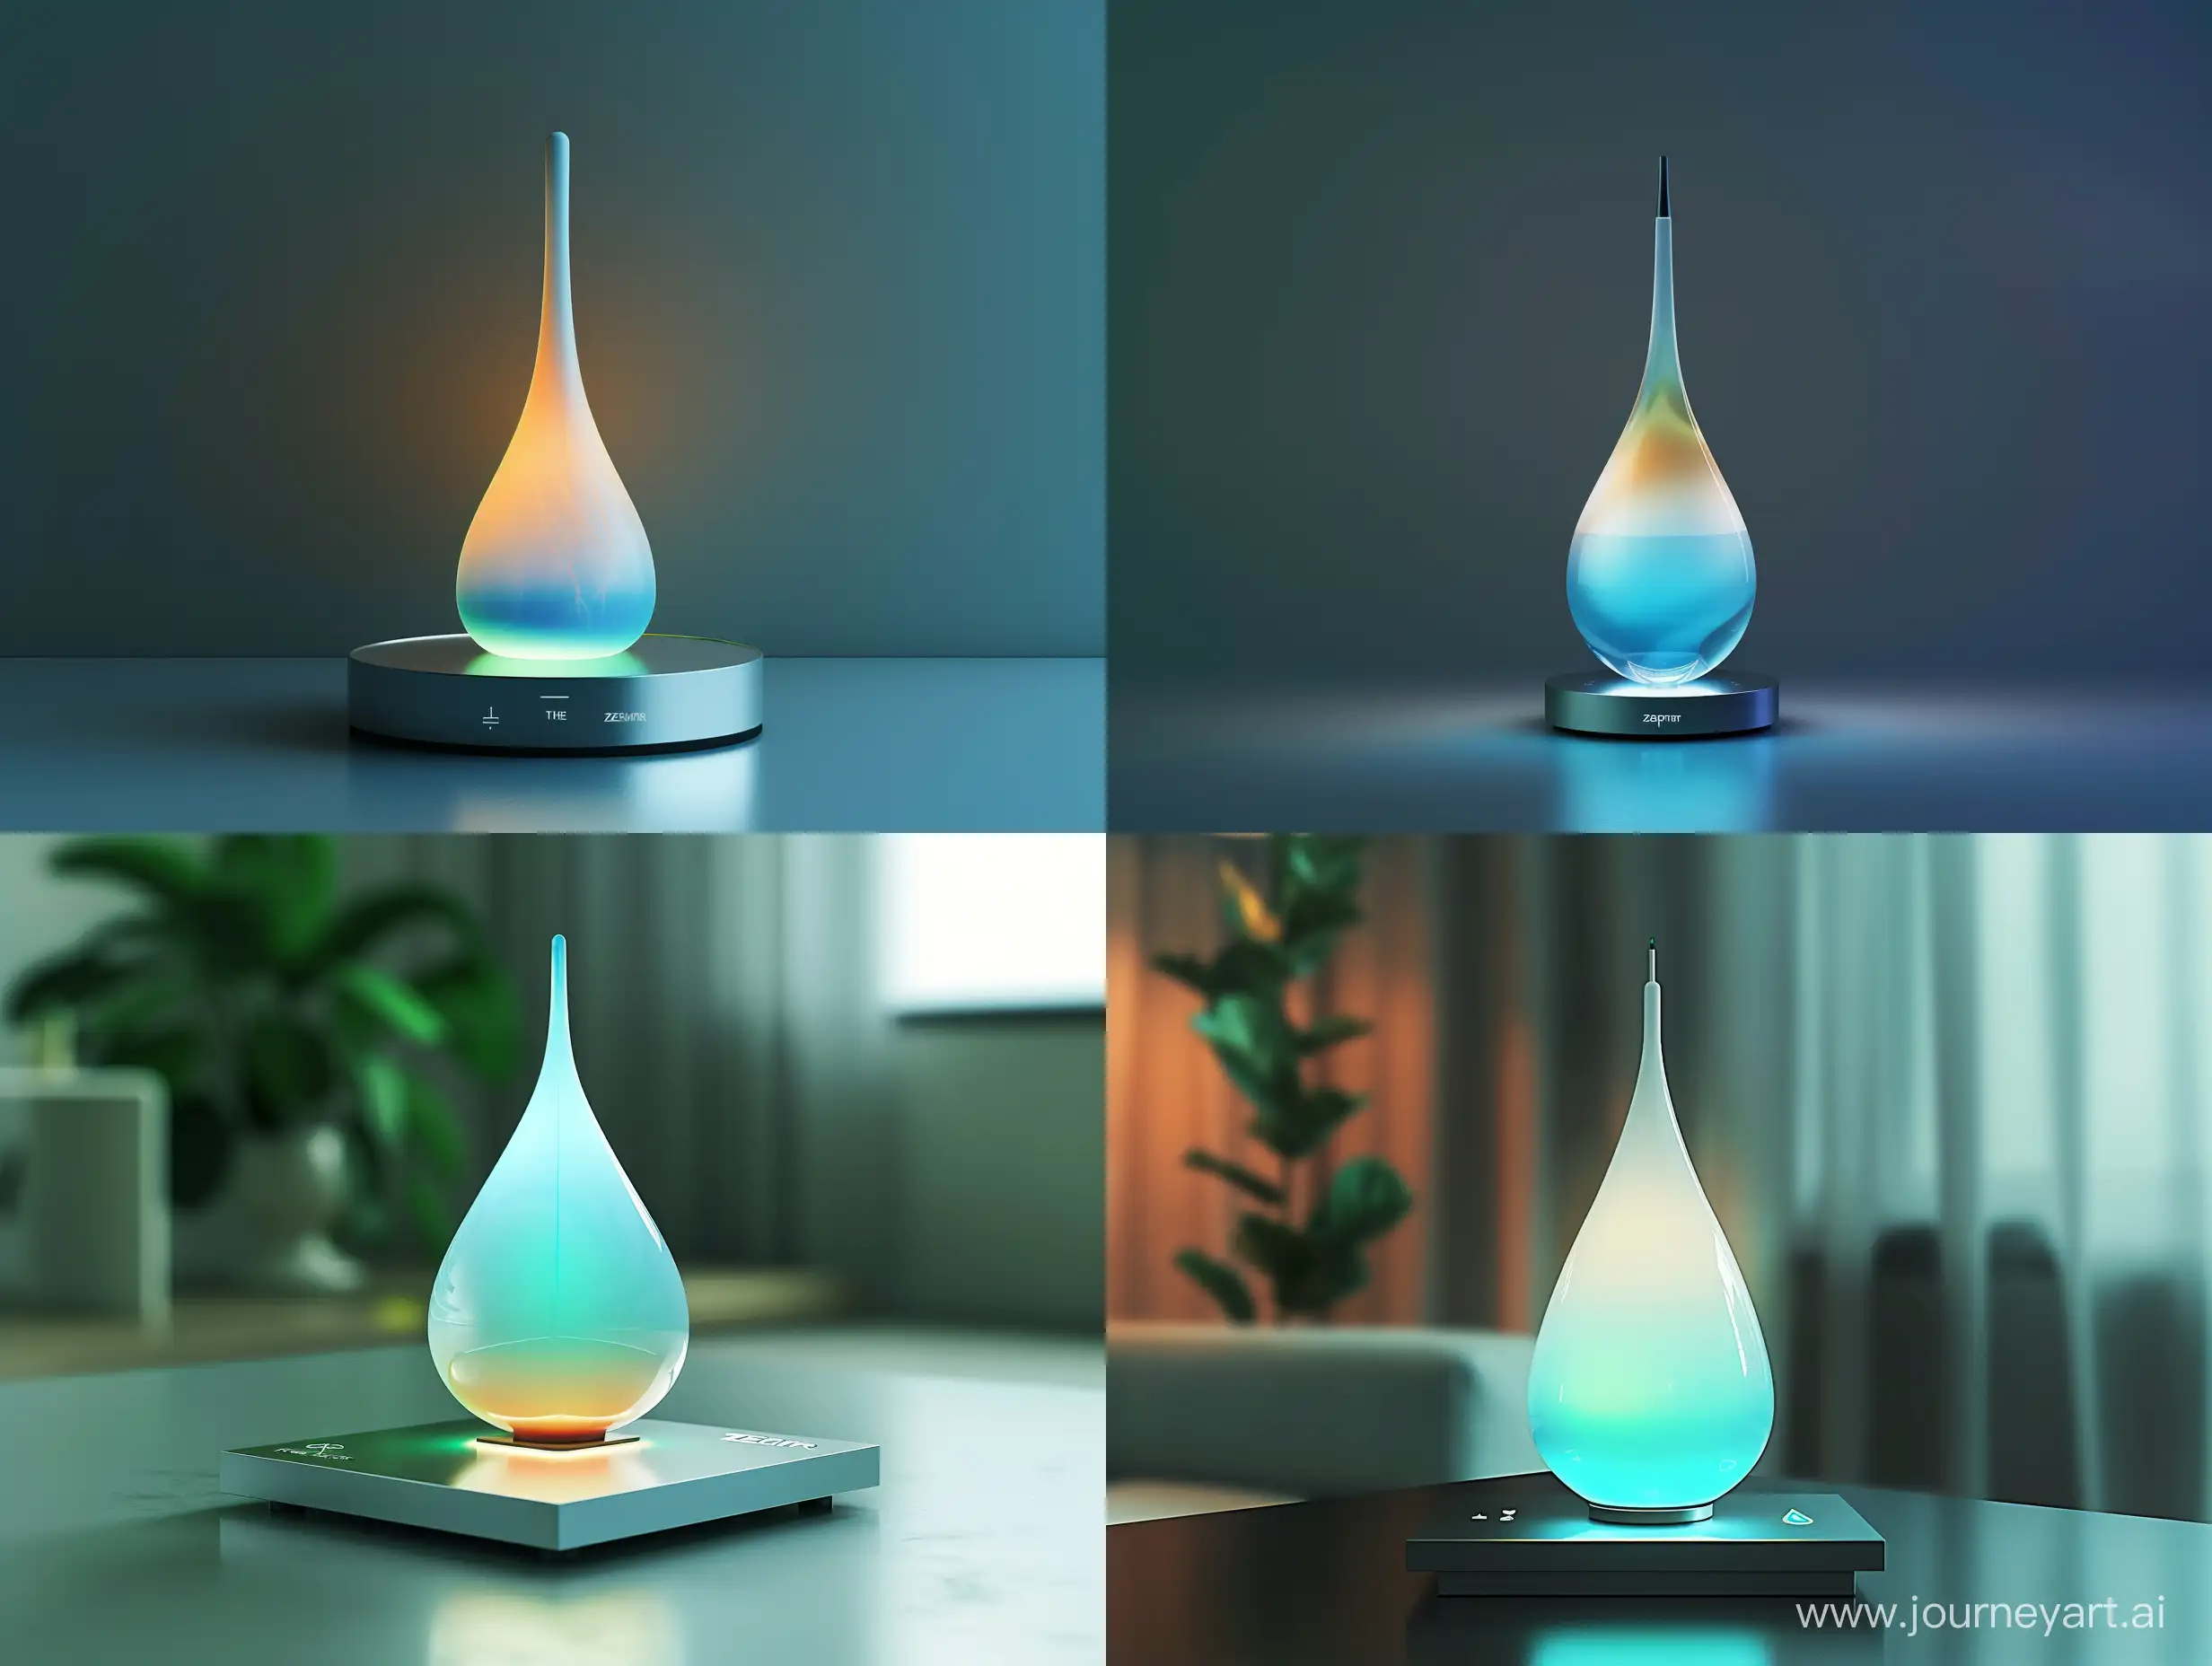 Imagine a single, slender teardrop, crafted from luminous ceramic or gleaming recycled glass.This is The Zephyr, a minimalist marvel that graces your smart home, promoting sustainable energy practices. Resting on a sleek, recycled aluminum base, it embodies elegance and innovation.
The teardrop form, reminiscent of nature's elements, glows with soft, calming blues and greens when energy use is efficient. As consumption increases, the light subtly shifts to warmer tones, prompting mindful adjustments. This captivating interplay of color, powered by energy-efficient LEDs, creates a serene and informative experience.
The Zephyr's minimalist design, inspired by award-winning concepts like the "Willow Lamp," seamlessly blends into any modern environment. Consider incorporating a subtle logo on the base, further emphasizing its commitment to sustainability.
Focus on capturing the essence of The Zephyr: minimalism, sustainability, and user-friendliness. Highlight the dynamic light display and the teardrop's interaction with the base. With this prompt, Midjourney can help you bring this captivating device to life.realistic style